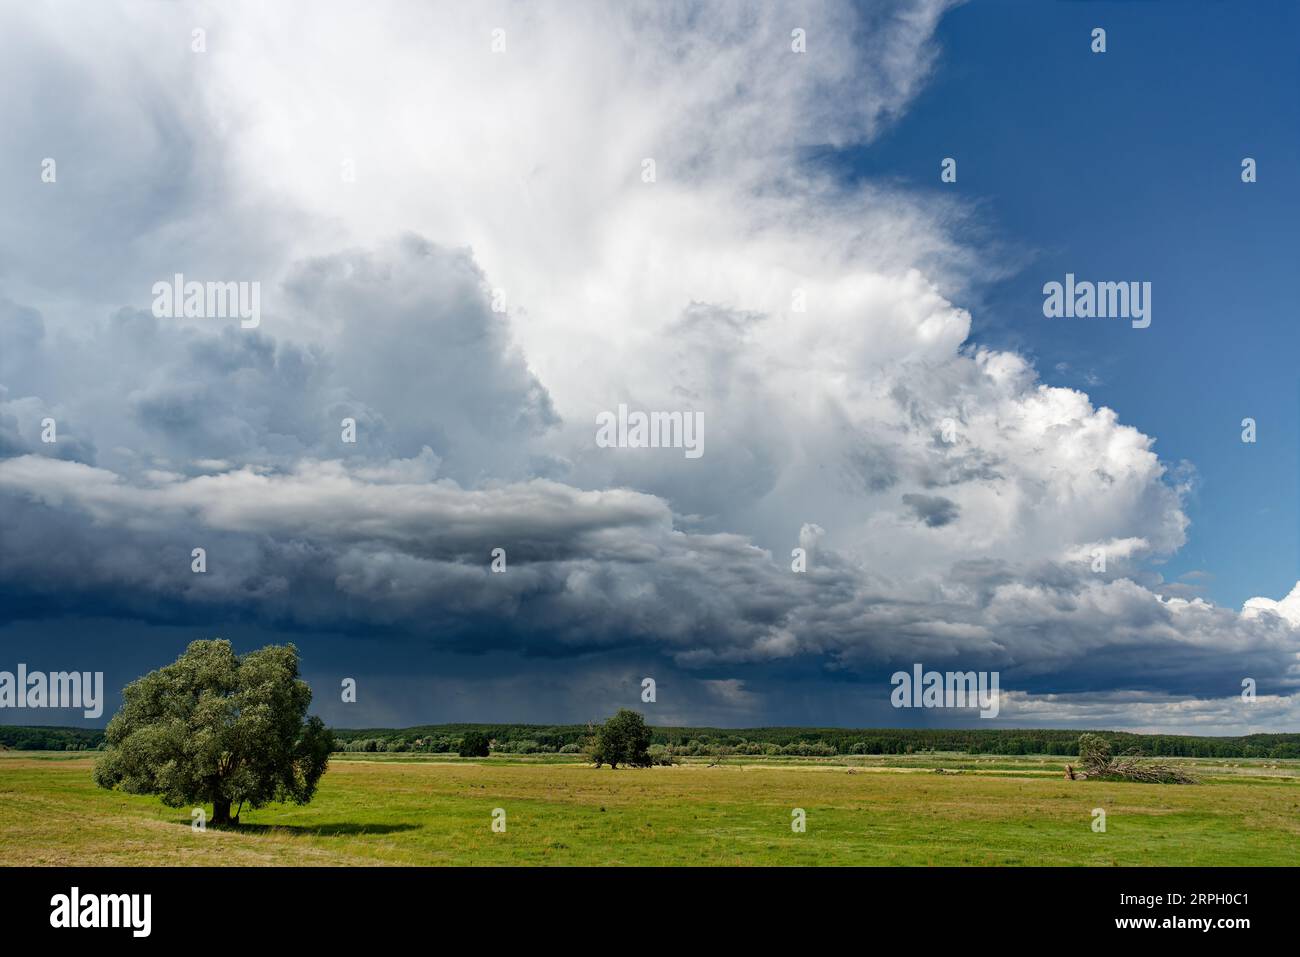 Violent thunderstorm front with threatening cloud formation, from which partly rain falls, over a flat floodplain landscape with meadows and single tr Stock Photo